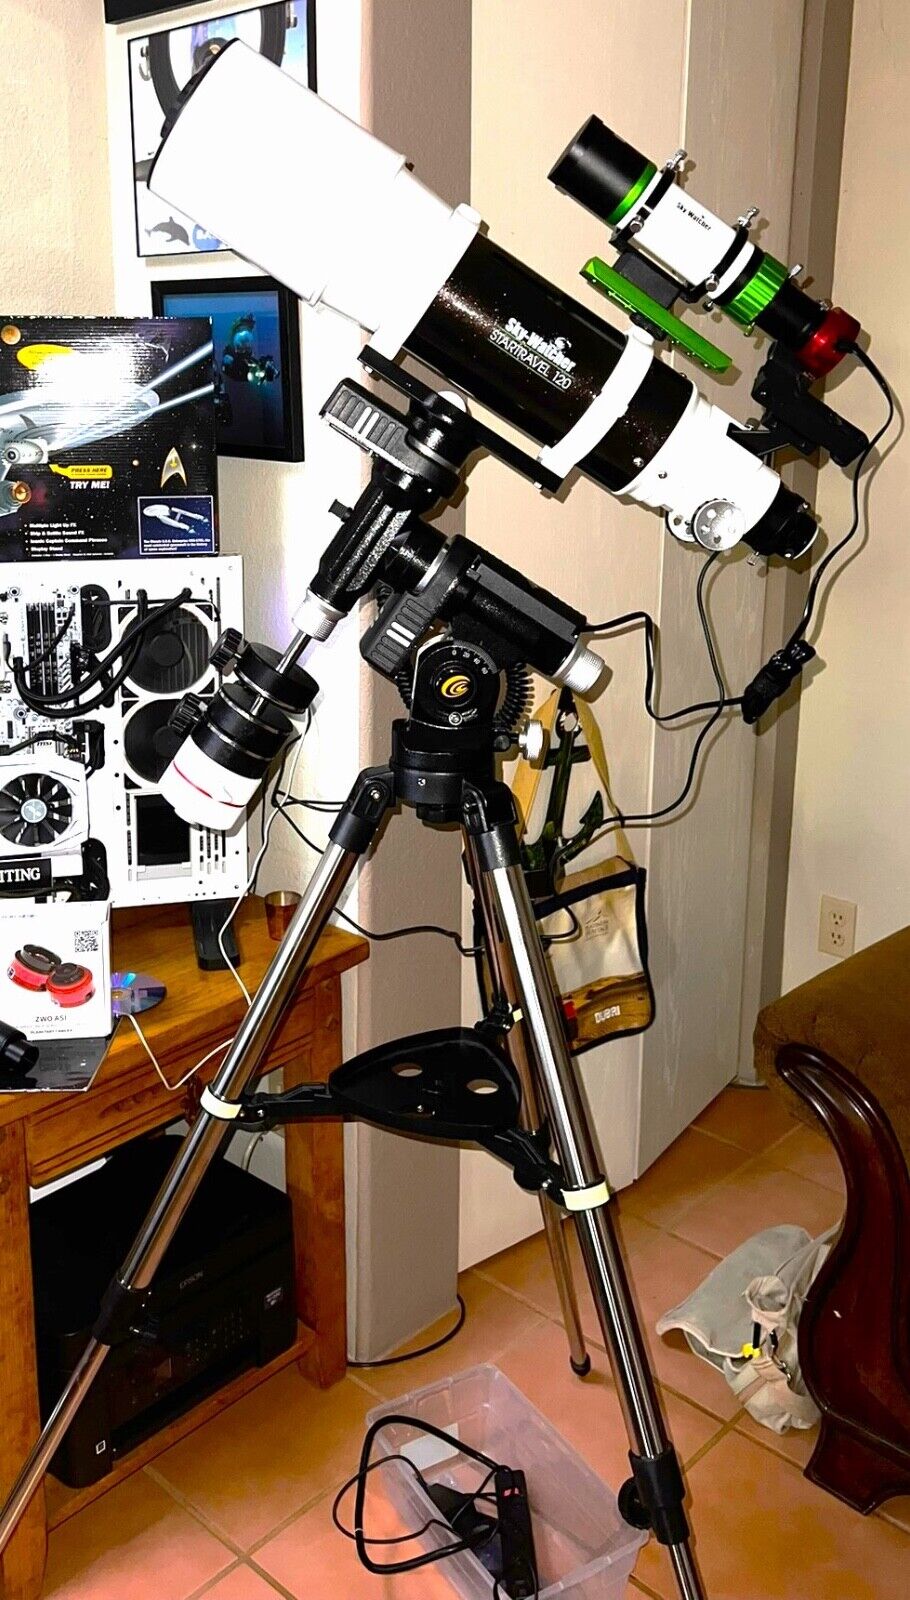 Astrophotography Skywatcher Telescope ASI Camera Air Plus Computerized Tracking